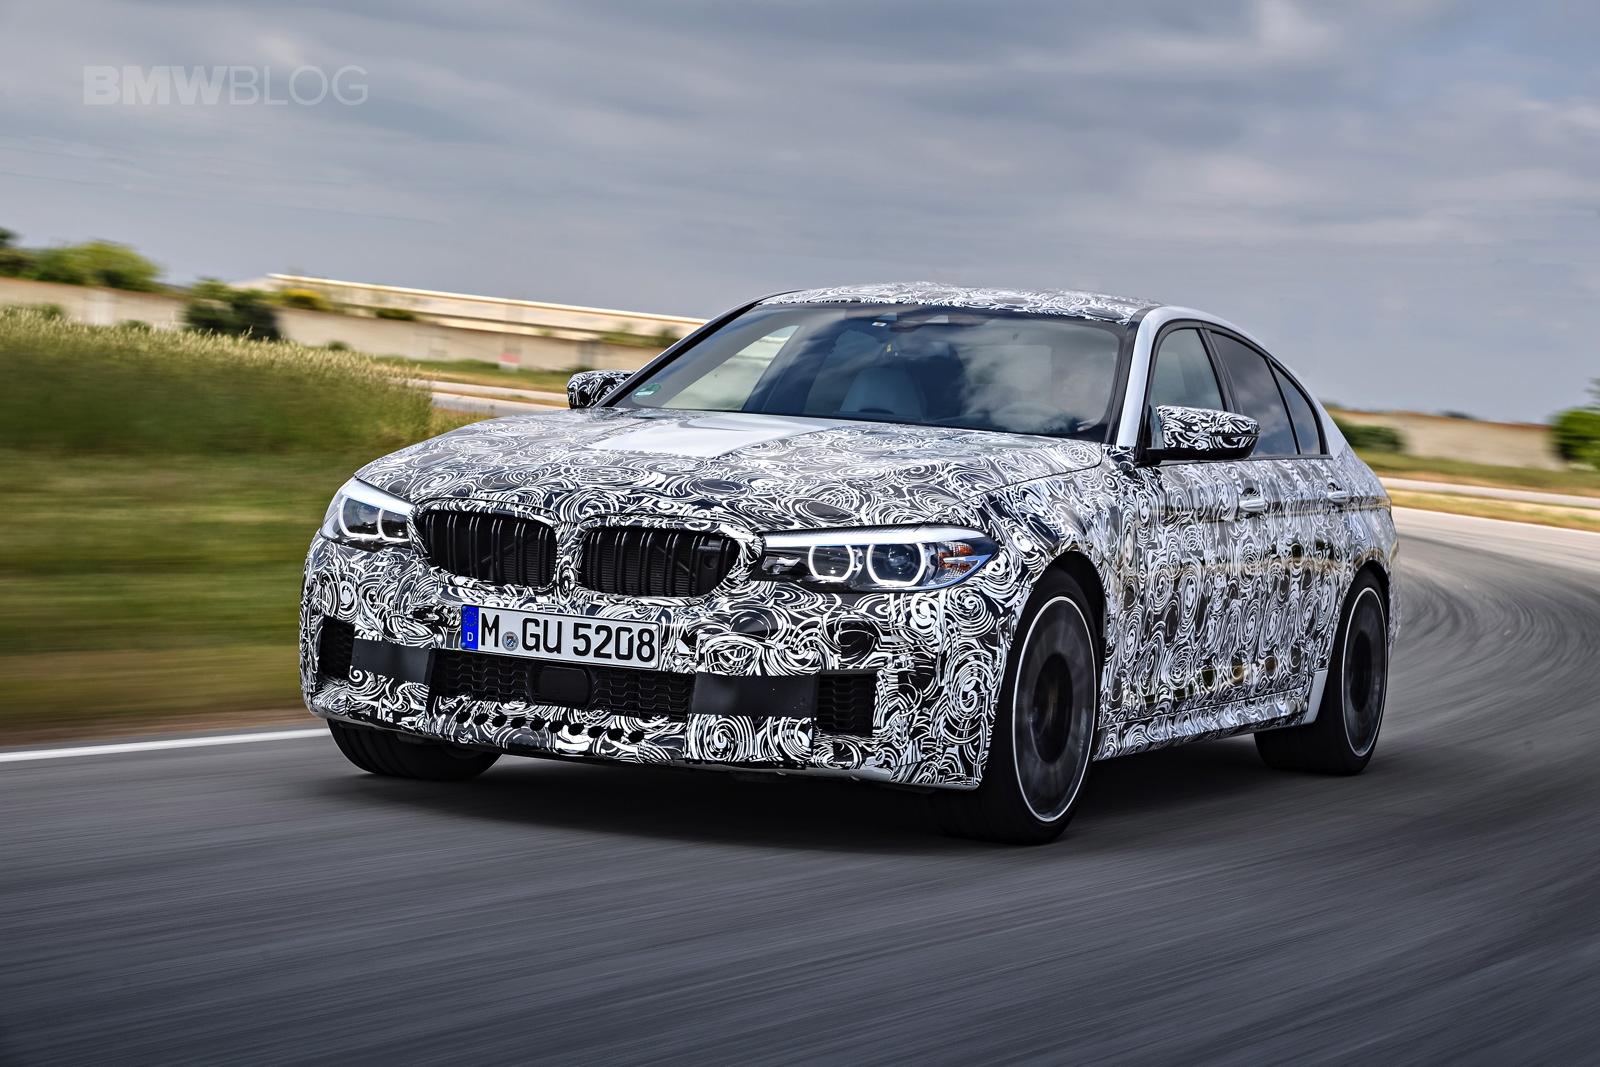 New BMW F90 M5 to be unveiled this month